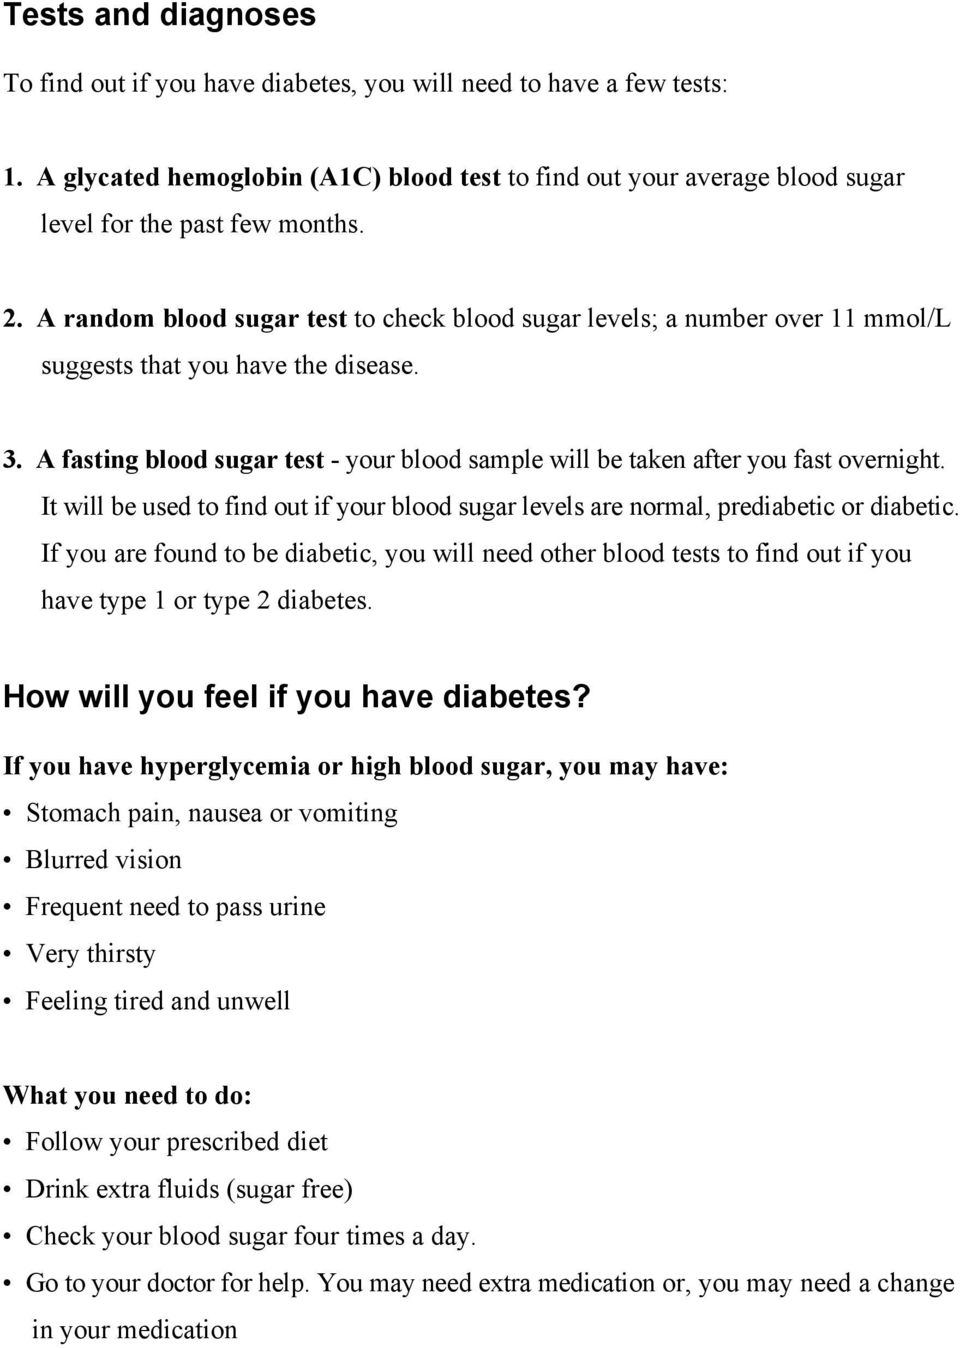 A fasting blood sugar test - your blood sample will be taken after you fast overnight. It will be used to find out if your blood sugar levels are normal, prediabetic or diabetic.